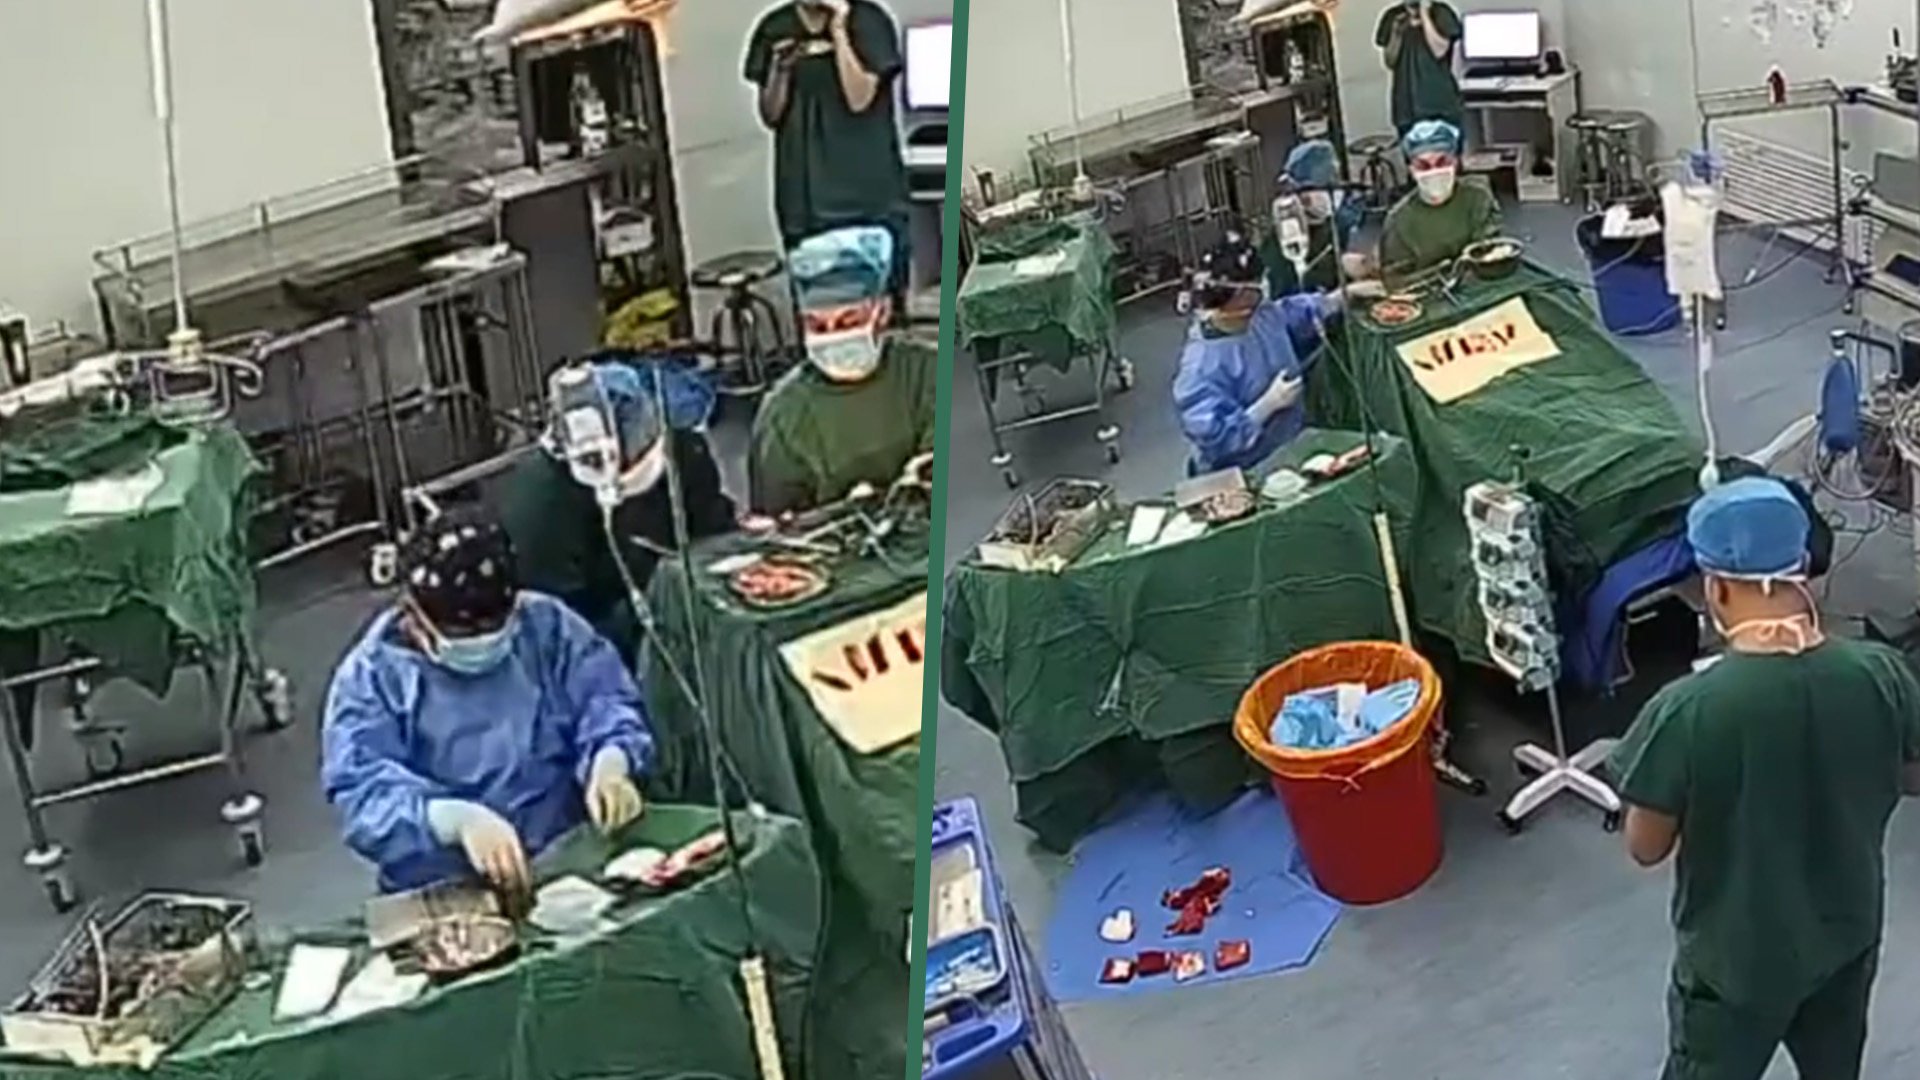 Mainland social media has been filled with praise for a doctor and his team in China who completed brain surgery on a patient despite being caught up in a powerful earthquake. Photo: SCMP composite/Baidu